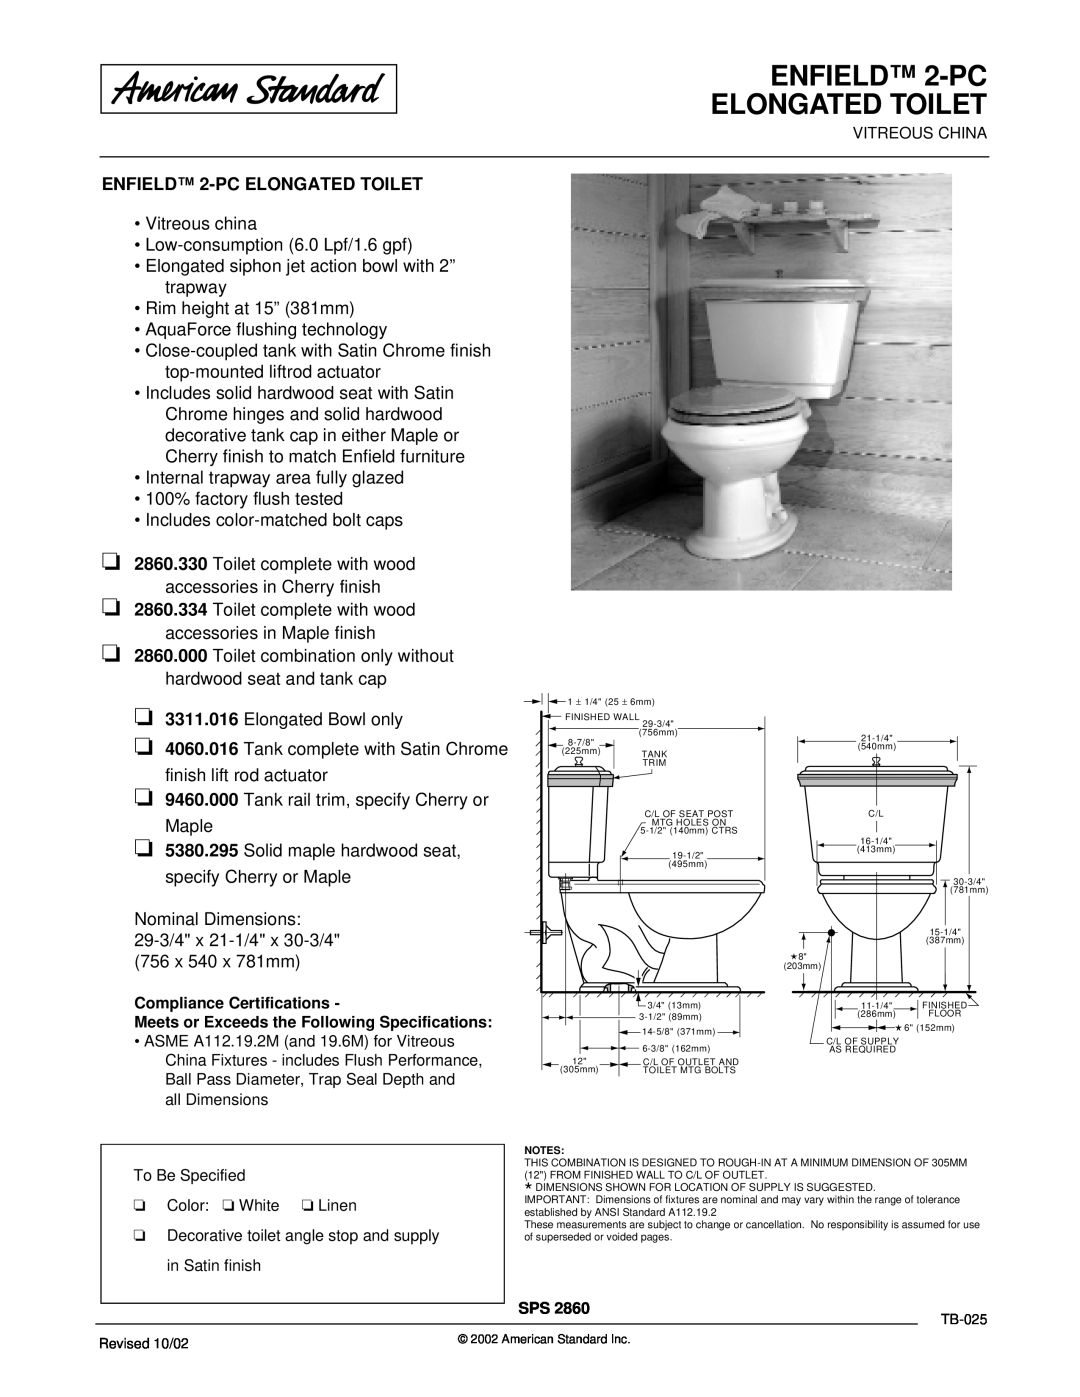 American Standard 2860.000 dimensions ENFIELD 2-PC ELONGATED TOILET, ENFIELD 2-PCELONGATED TOILET 